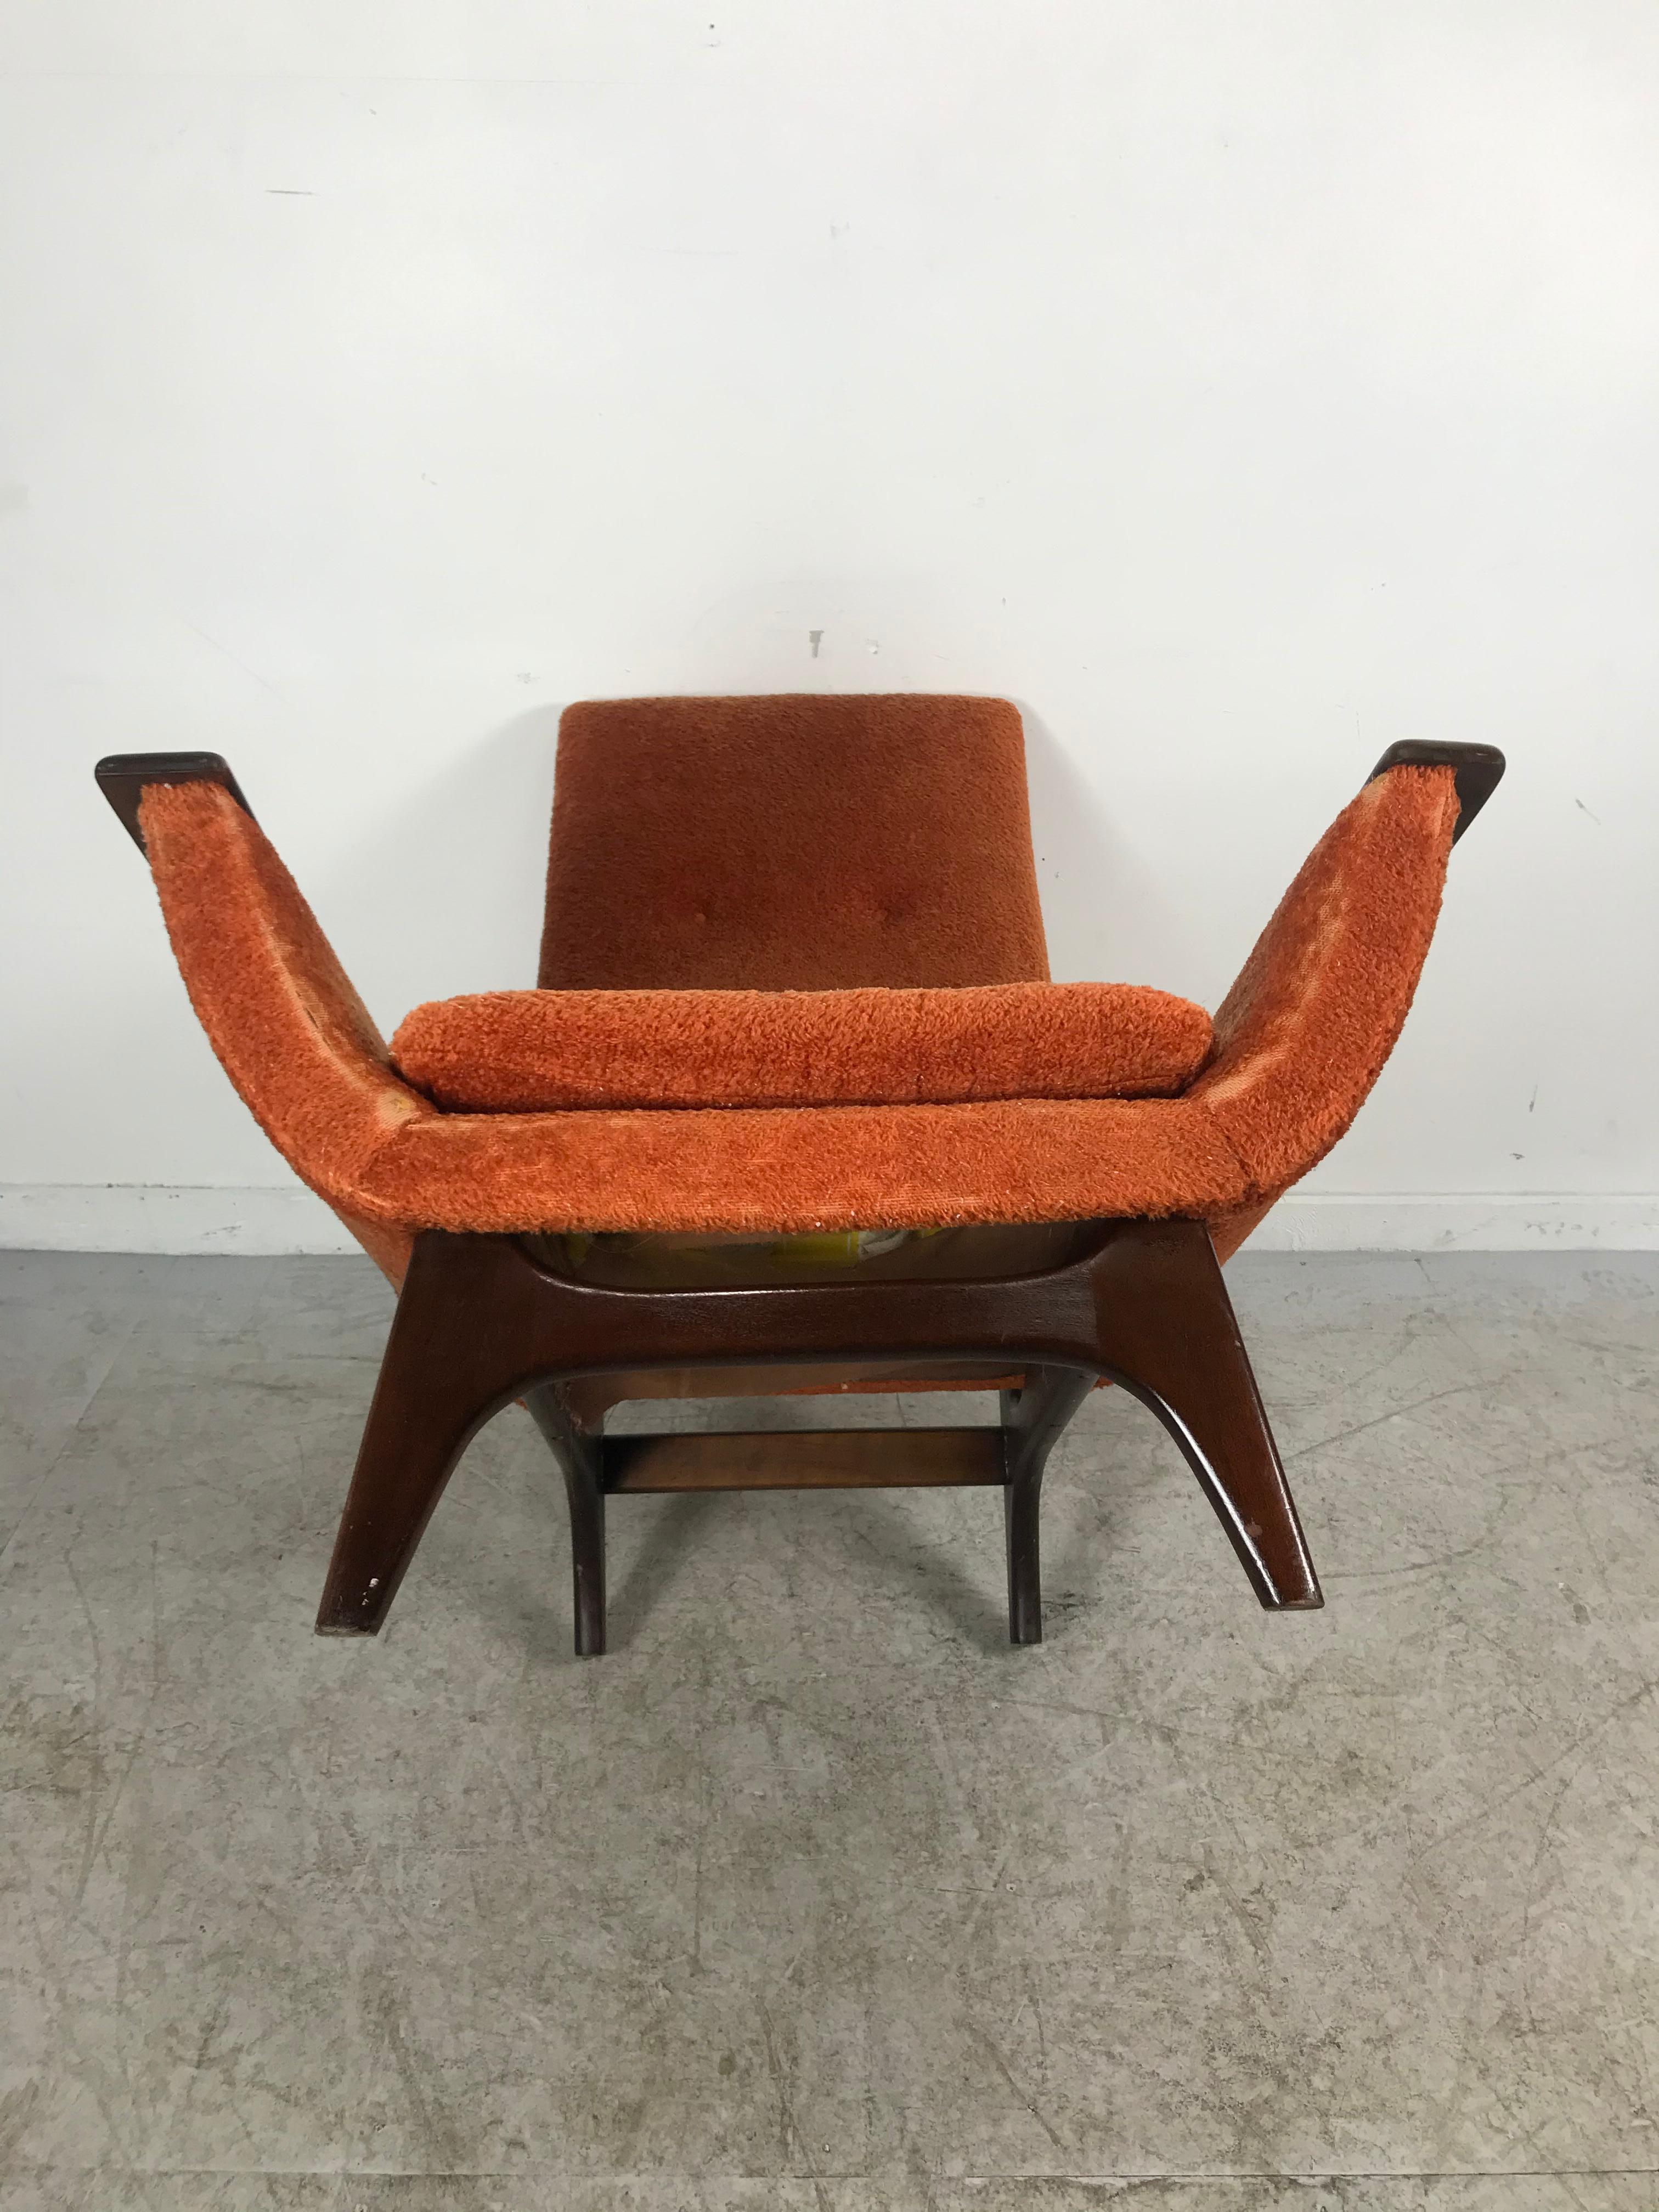 Mid-20th Century Dramatic Modernist Lounge Chair, Sculpted Walnut by Luigi Tiengo for Cimon